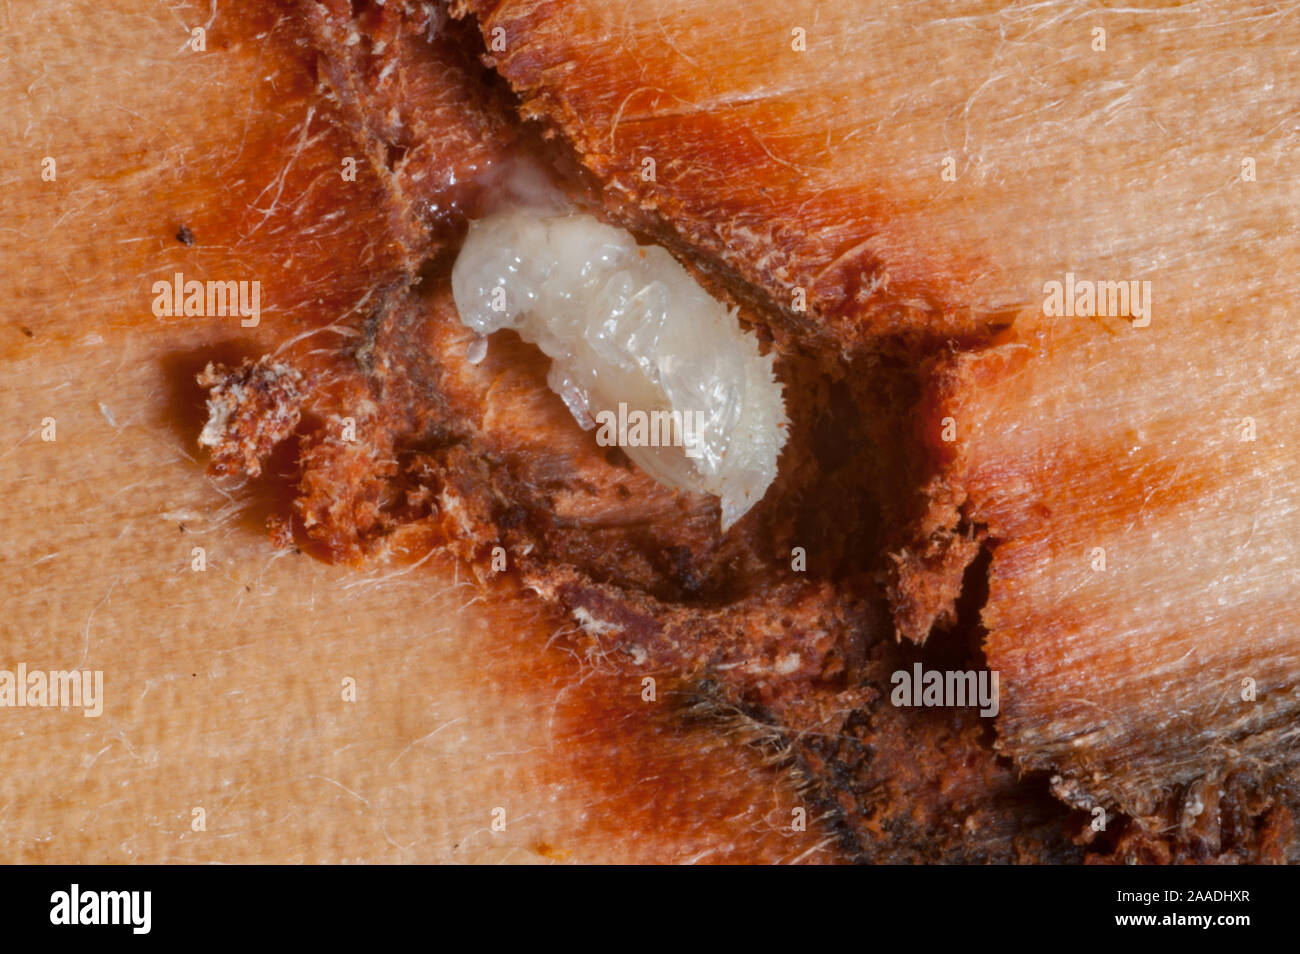 Mountain pine beetle (Dendroctonus ponderosae)  pupa in Lodgepole Pine,  Teton National Park, Wyoming, USA, August. The current outbreak of mountain pine beetles has been particularly aggressive. This is due to climate change, monoculture planting of trees and fire suppression. Stock Photo